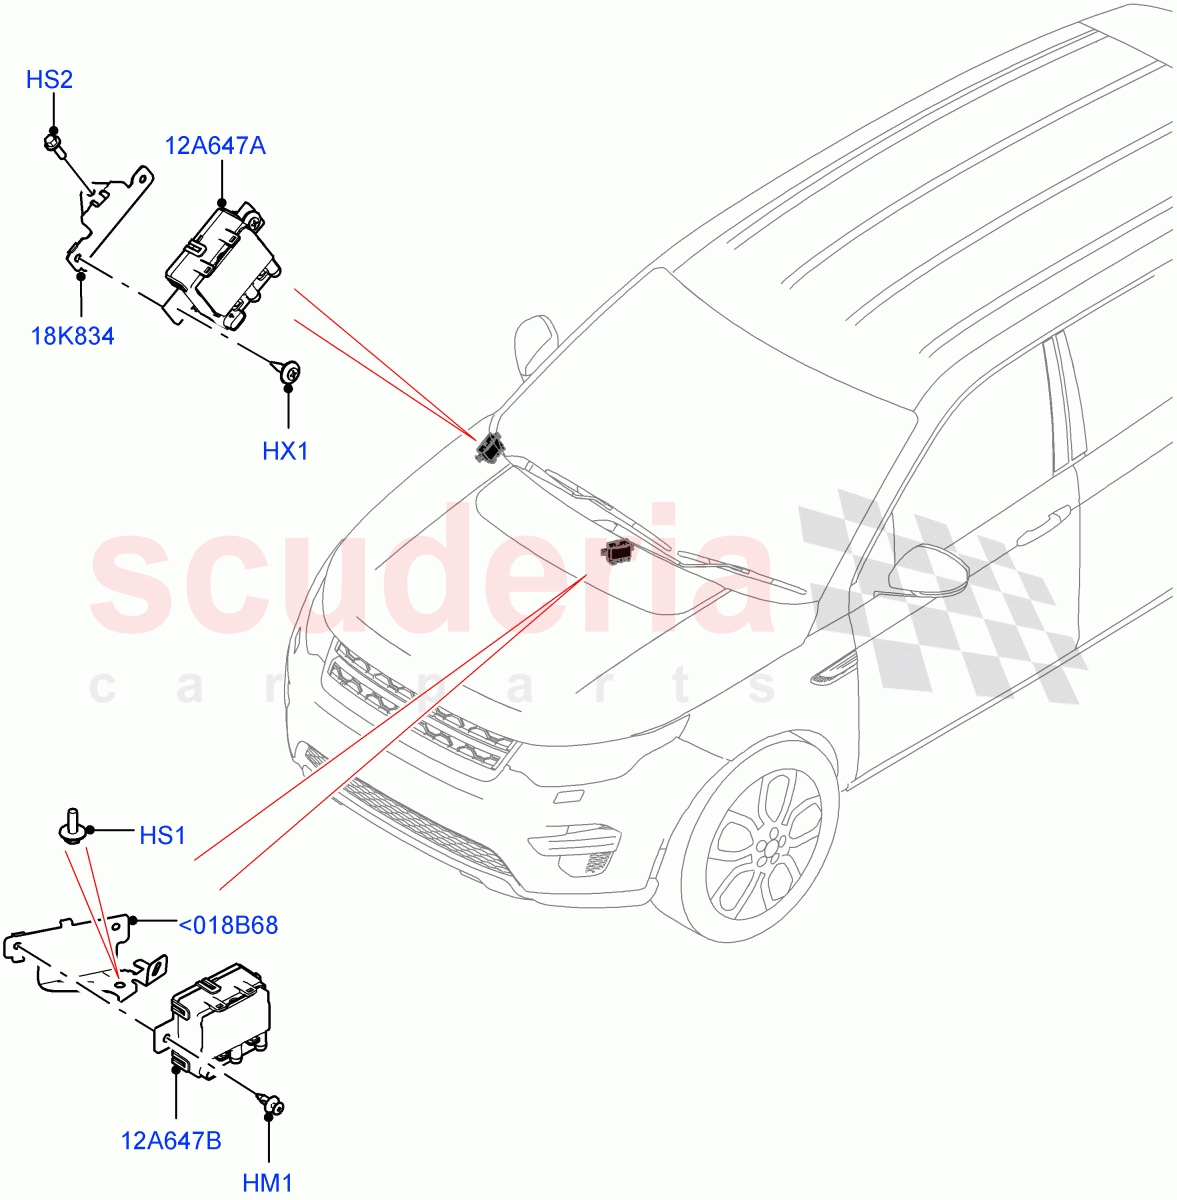 Air Conditioning And Heater Sensors(Changsu (China),Air Purge Ionisation / PM2.5)((V)FROMMG575835) of Land Rover Land Rover Range Rover Evoque (2019+) [1.5 I3 Turbo Petrol AJ20P3]